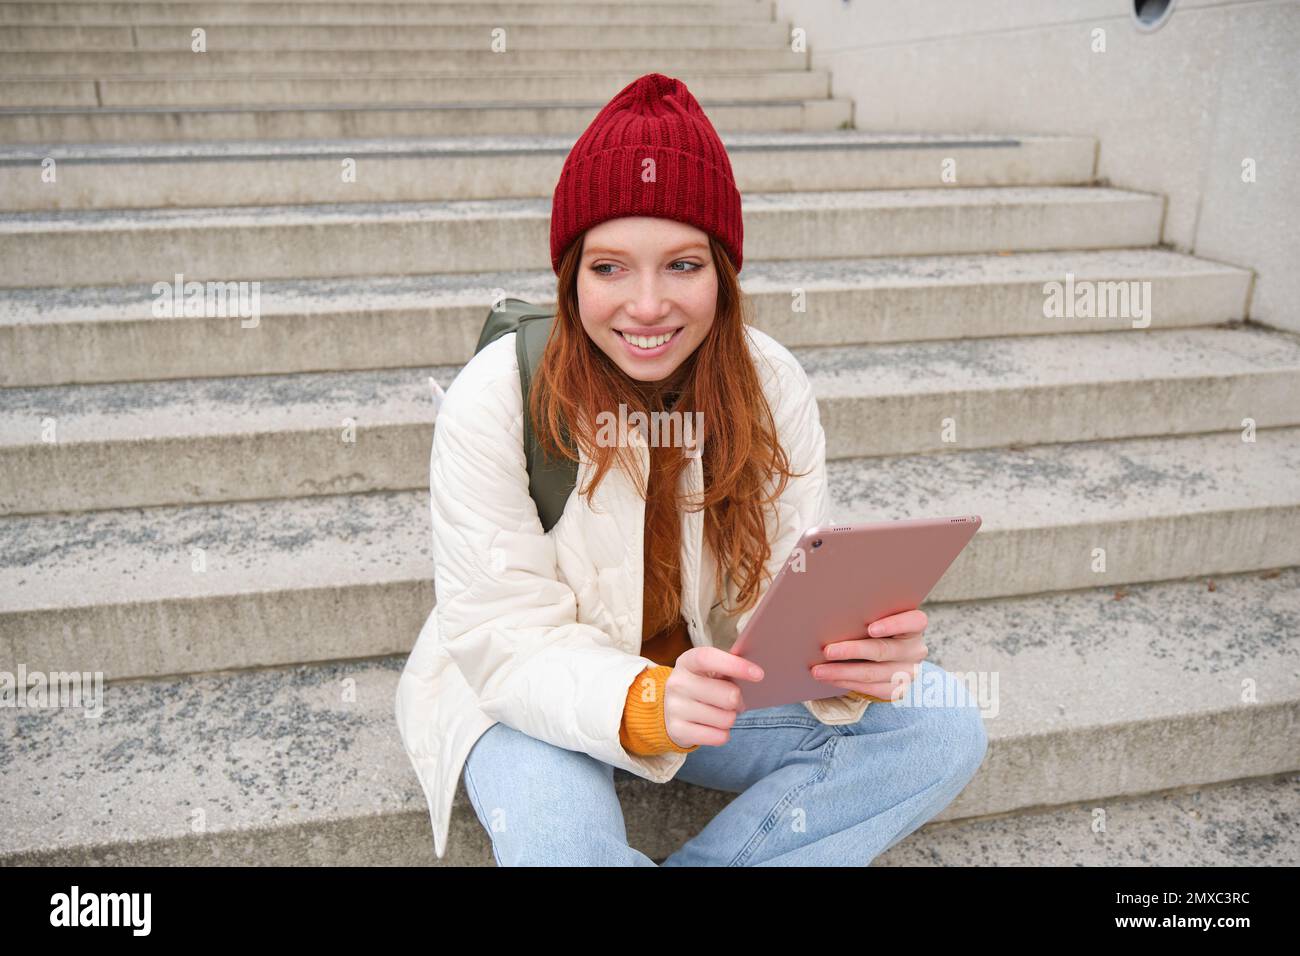 Young stylish girl, redhead female students sits on stairs outdoors with digital tablet, reads, uses social media app on gadget, plays games while wai Stock Photo